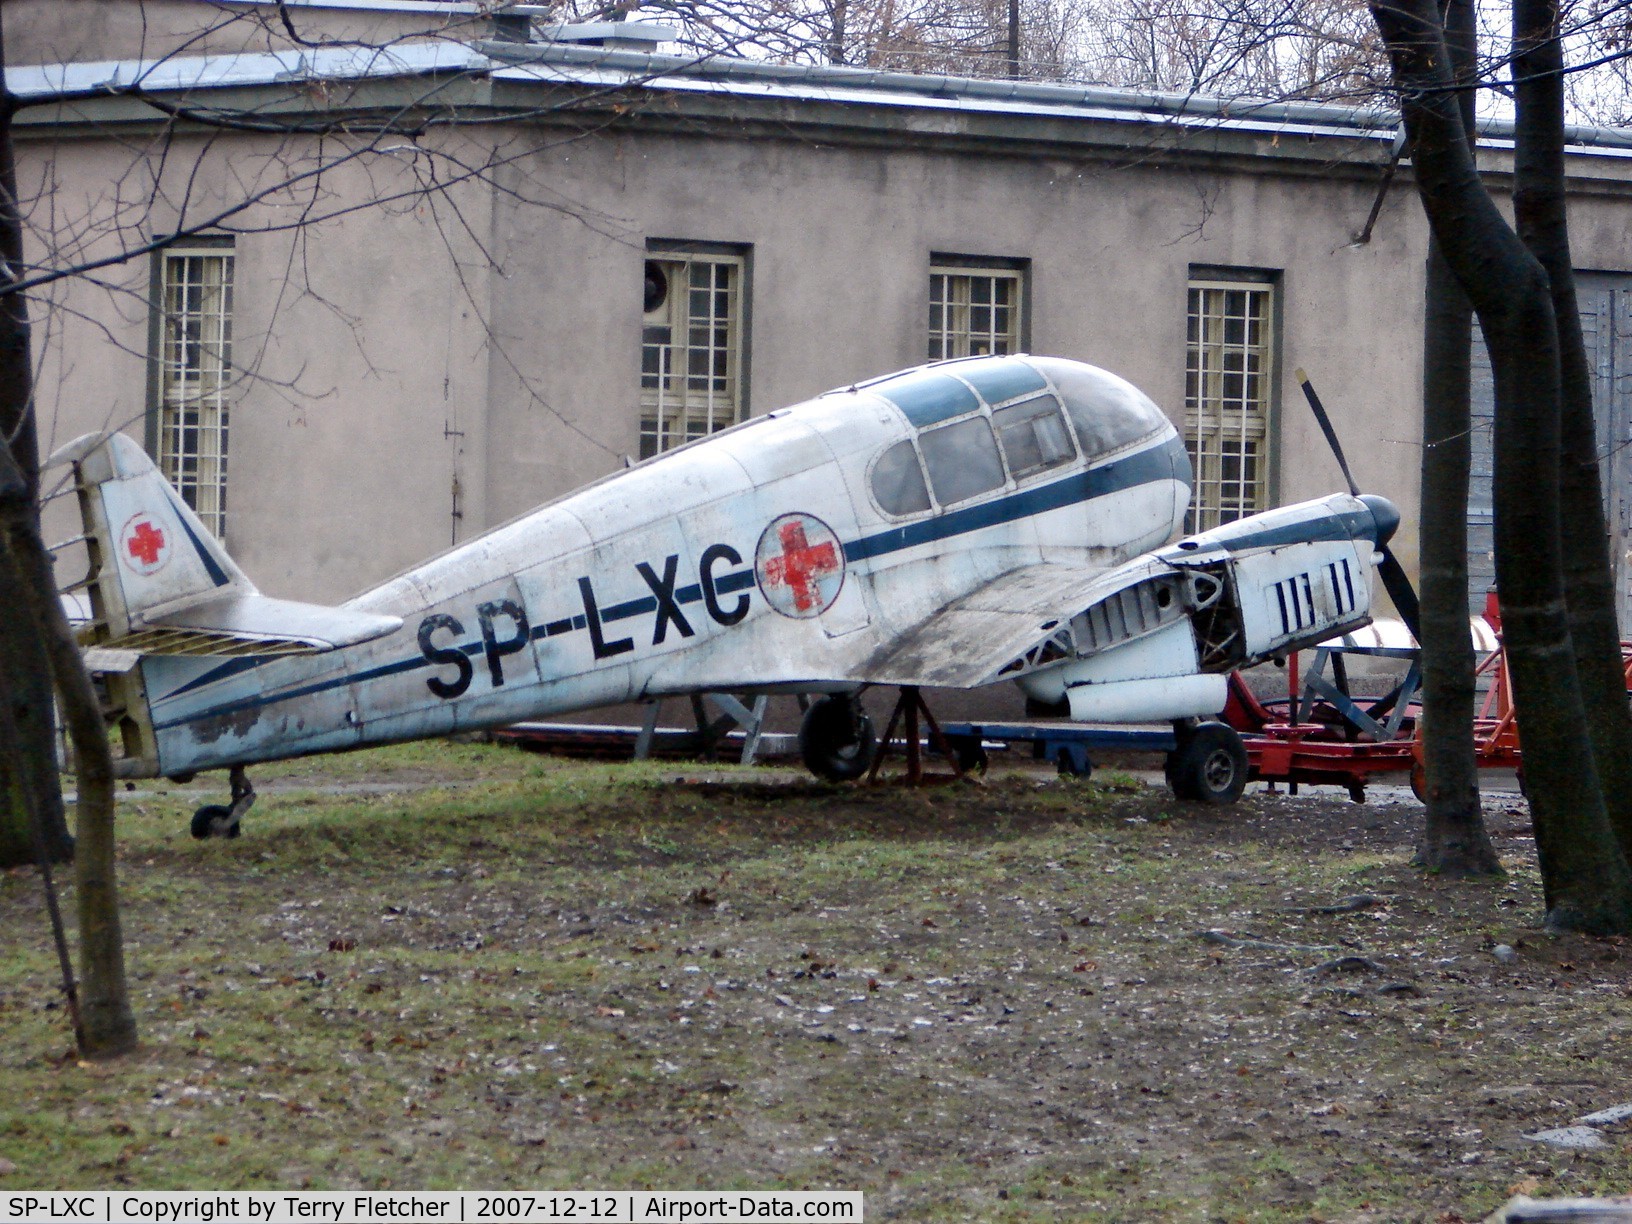 SP-LXC, Let Aer 45S super Areo C/N 03002, This Czech built Aero AE-45S Suer Aero served as an Air Ambulance in Poland and now awaits restoration at the Poland Aviation Museum in Krakow